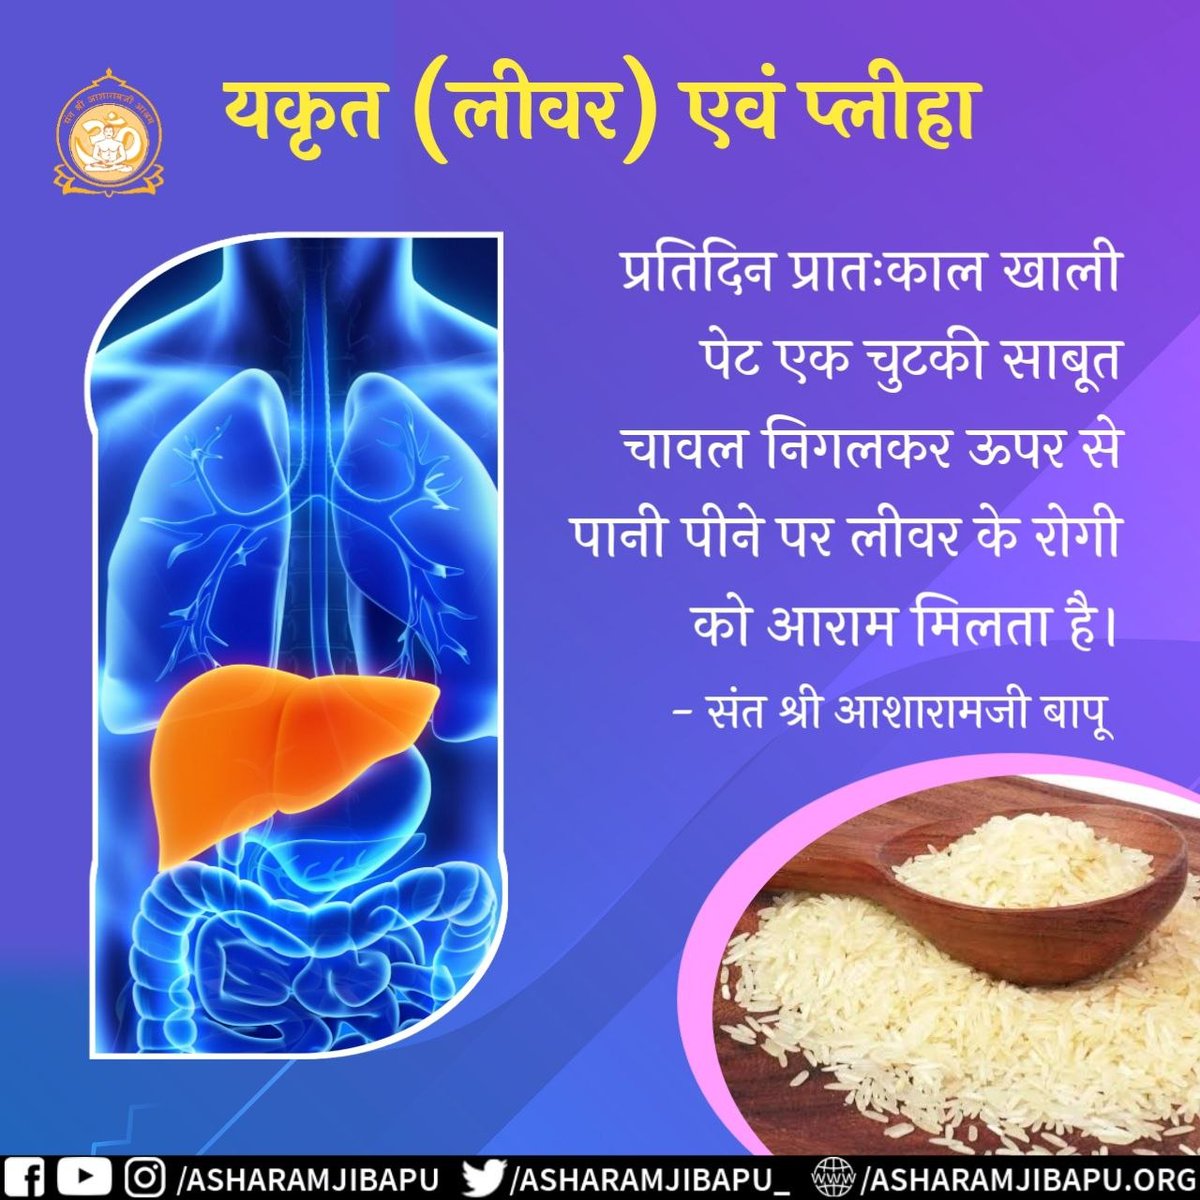 Sant Shri Asharamji Bapu ji has always shared with us the benefits of ayurveda and it's gift to mankind by offering remedy to serious ailments, truly ayurveda is Prakriti Ka Vardaan for all. Treasure Of Health Prakriti Ka Vardaan #AyurvedaForWellness